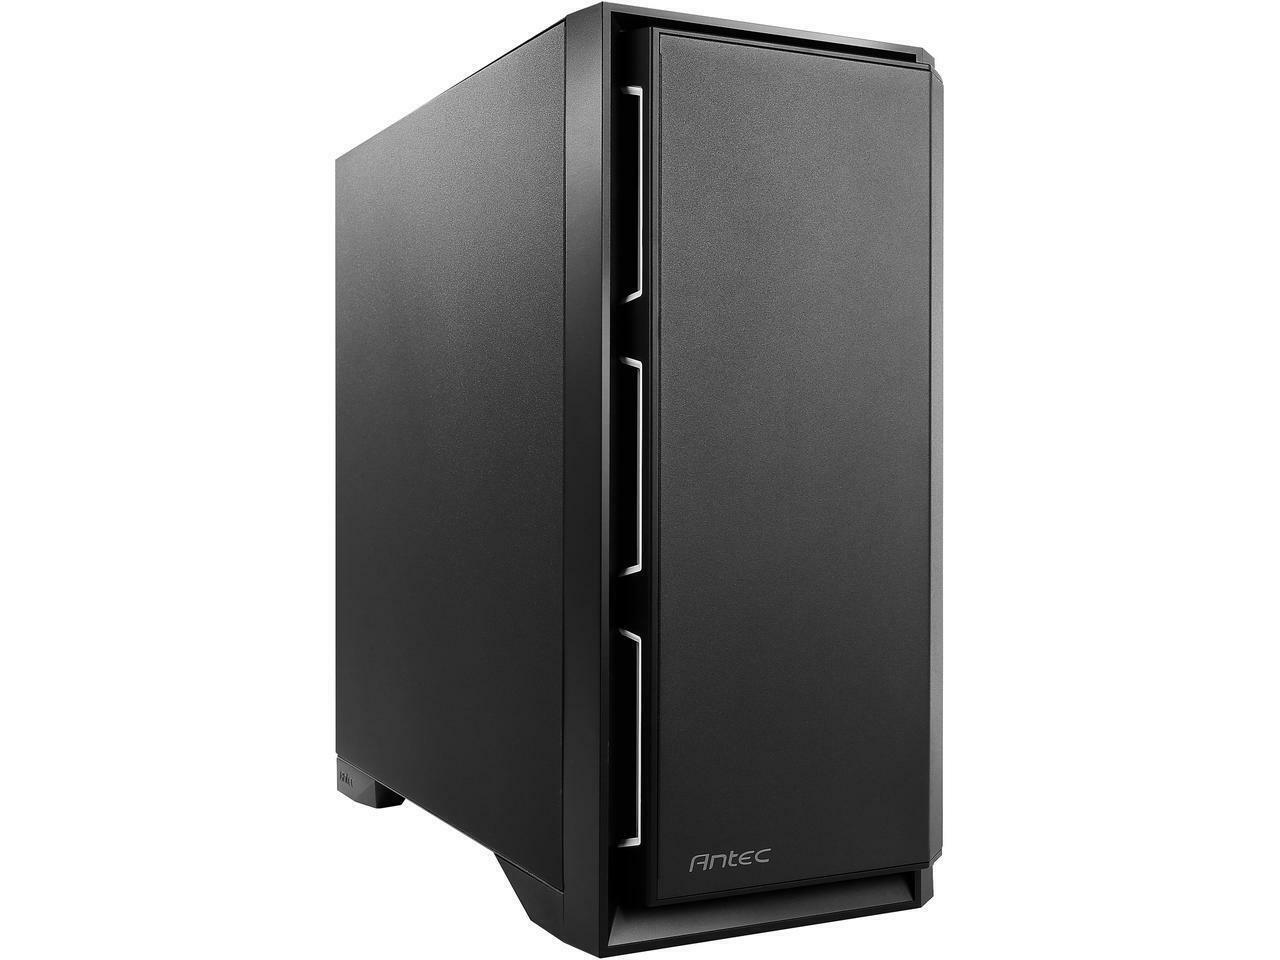 Antec Performance Series P101 Silent Black 0.8mm SPCC ATX Mid Tower Case with 8